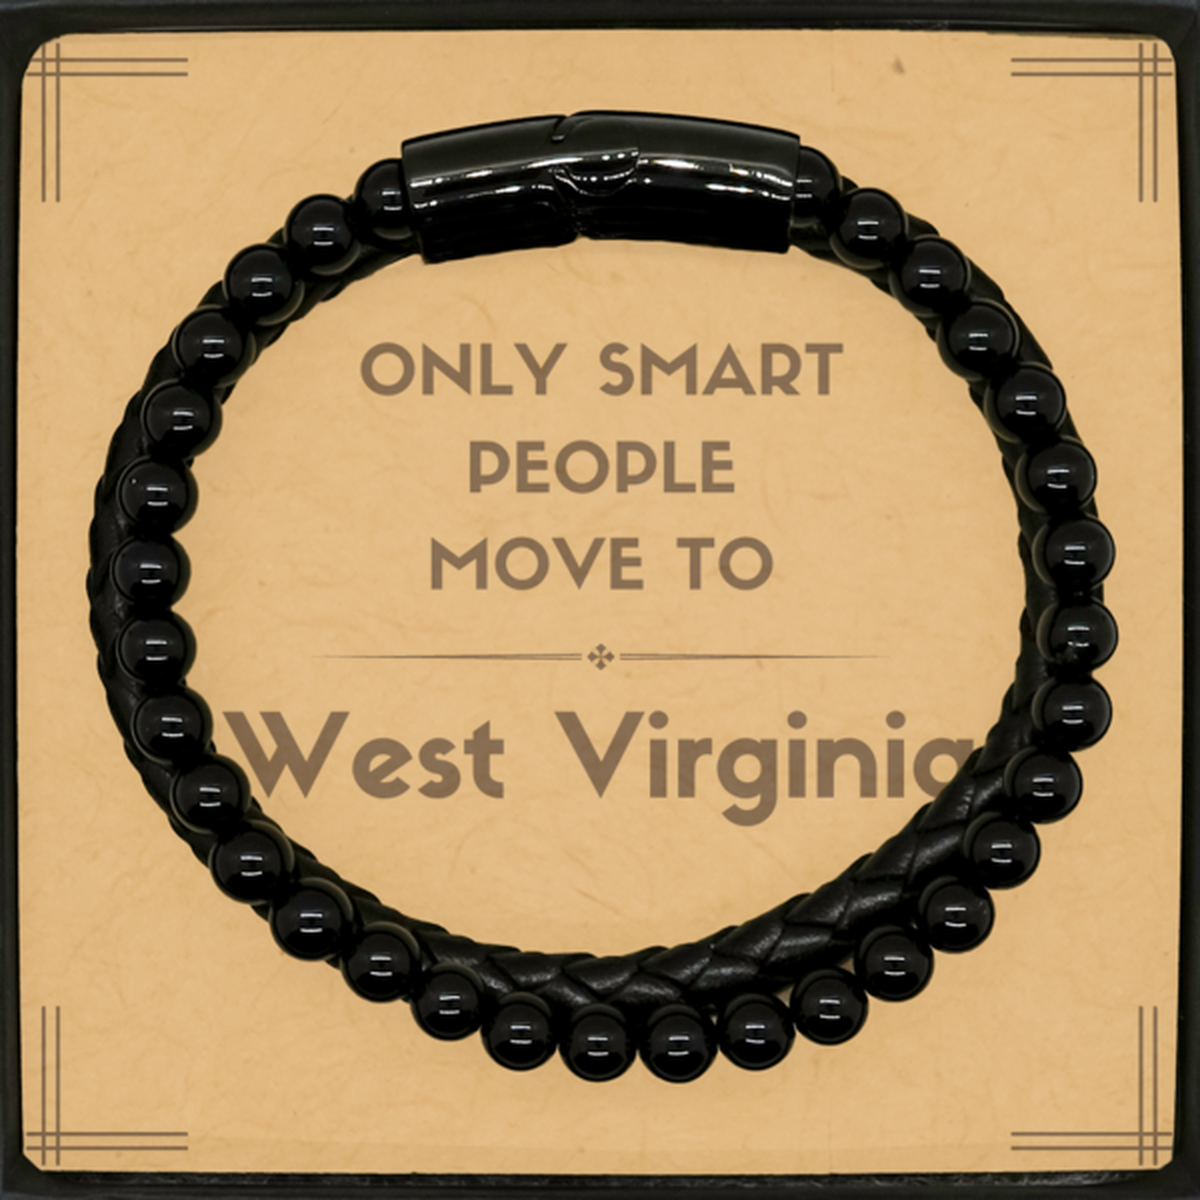 Only smart people move to West Virginia Stone Leather Bracelets, Message Card Gifts For West Virginia, Move to West Virginia Gifts for Friends Coworker Funny Saying Quote